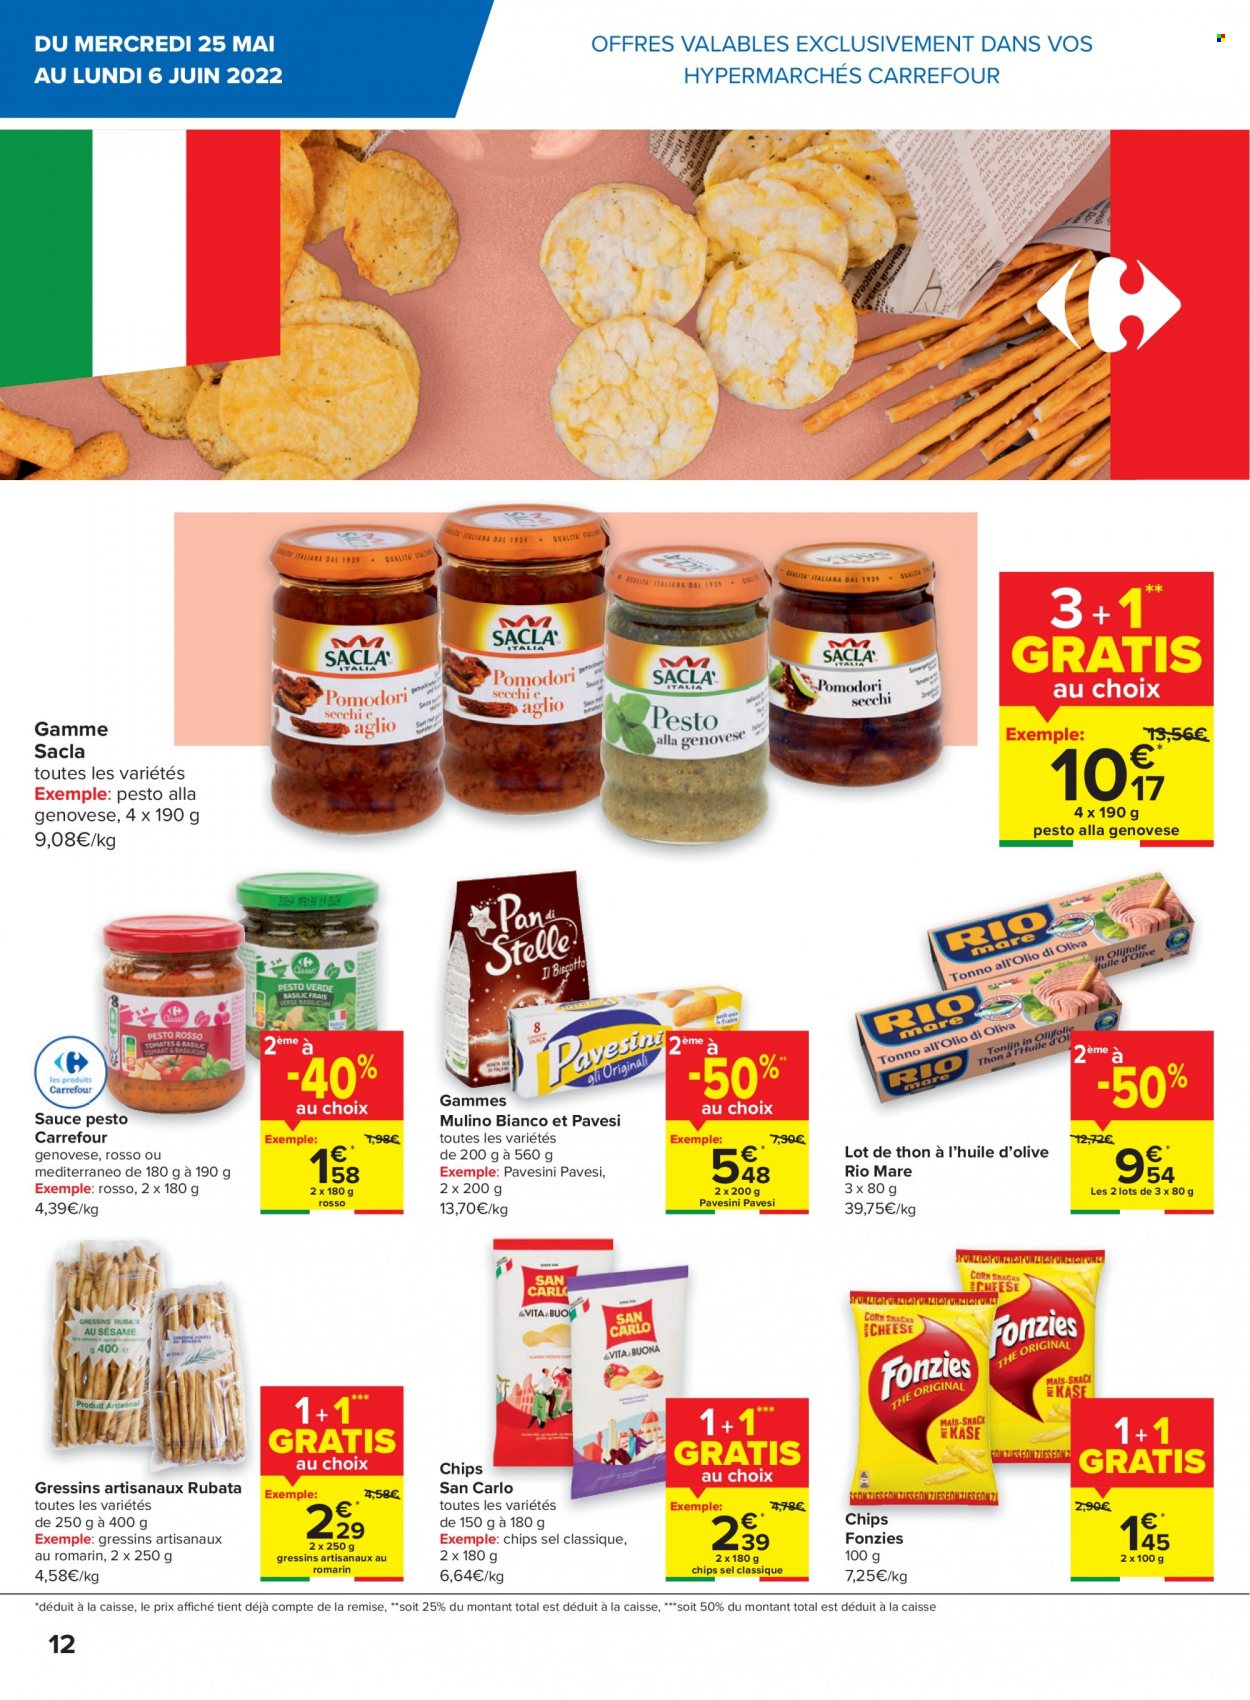 Catalogue Carrefour hypermarkt - 25.5.2022 - 31.5.2022. Page 12.